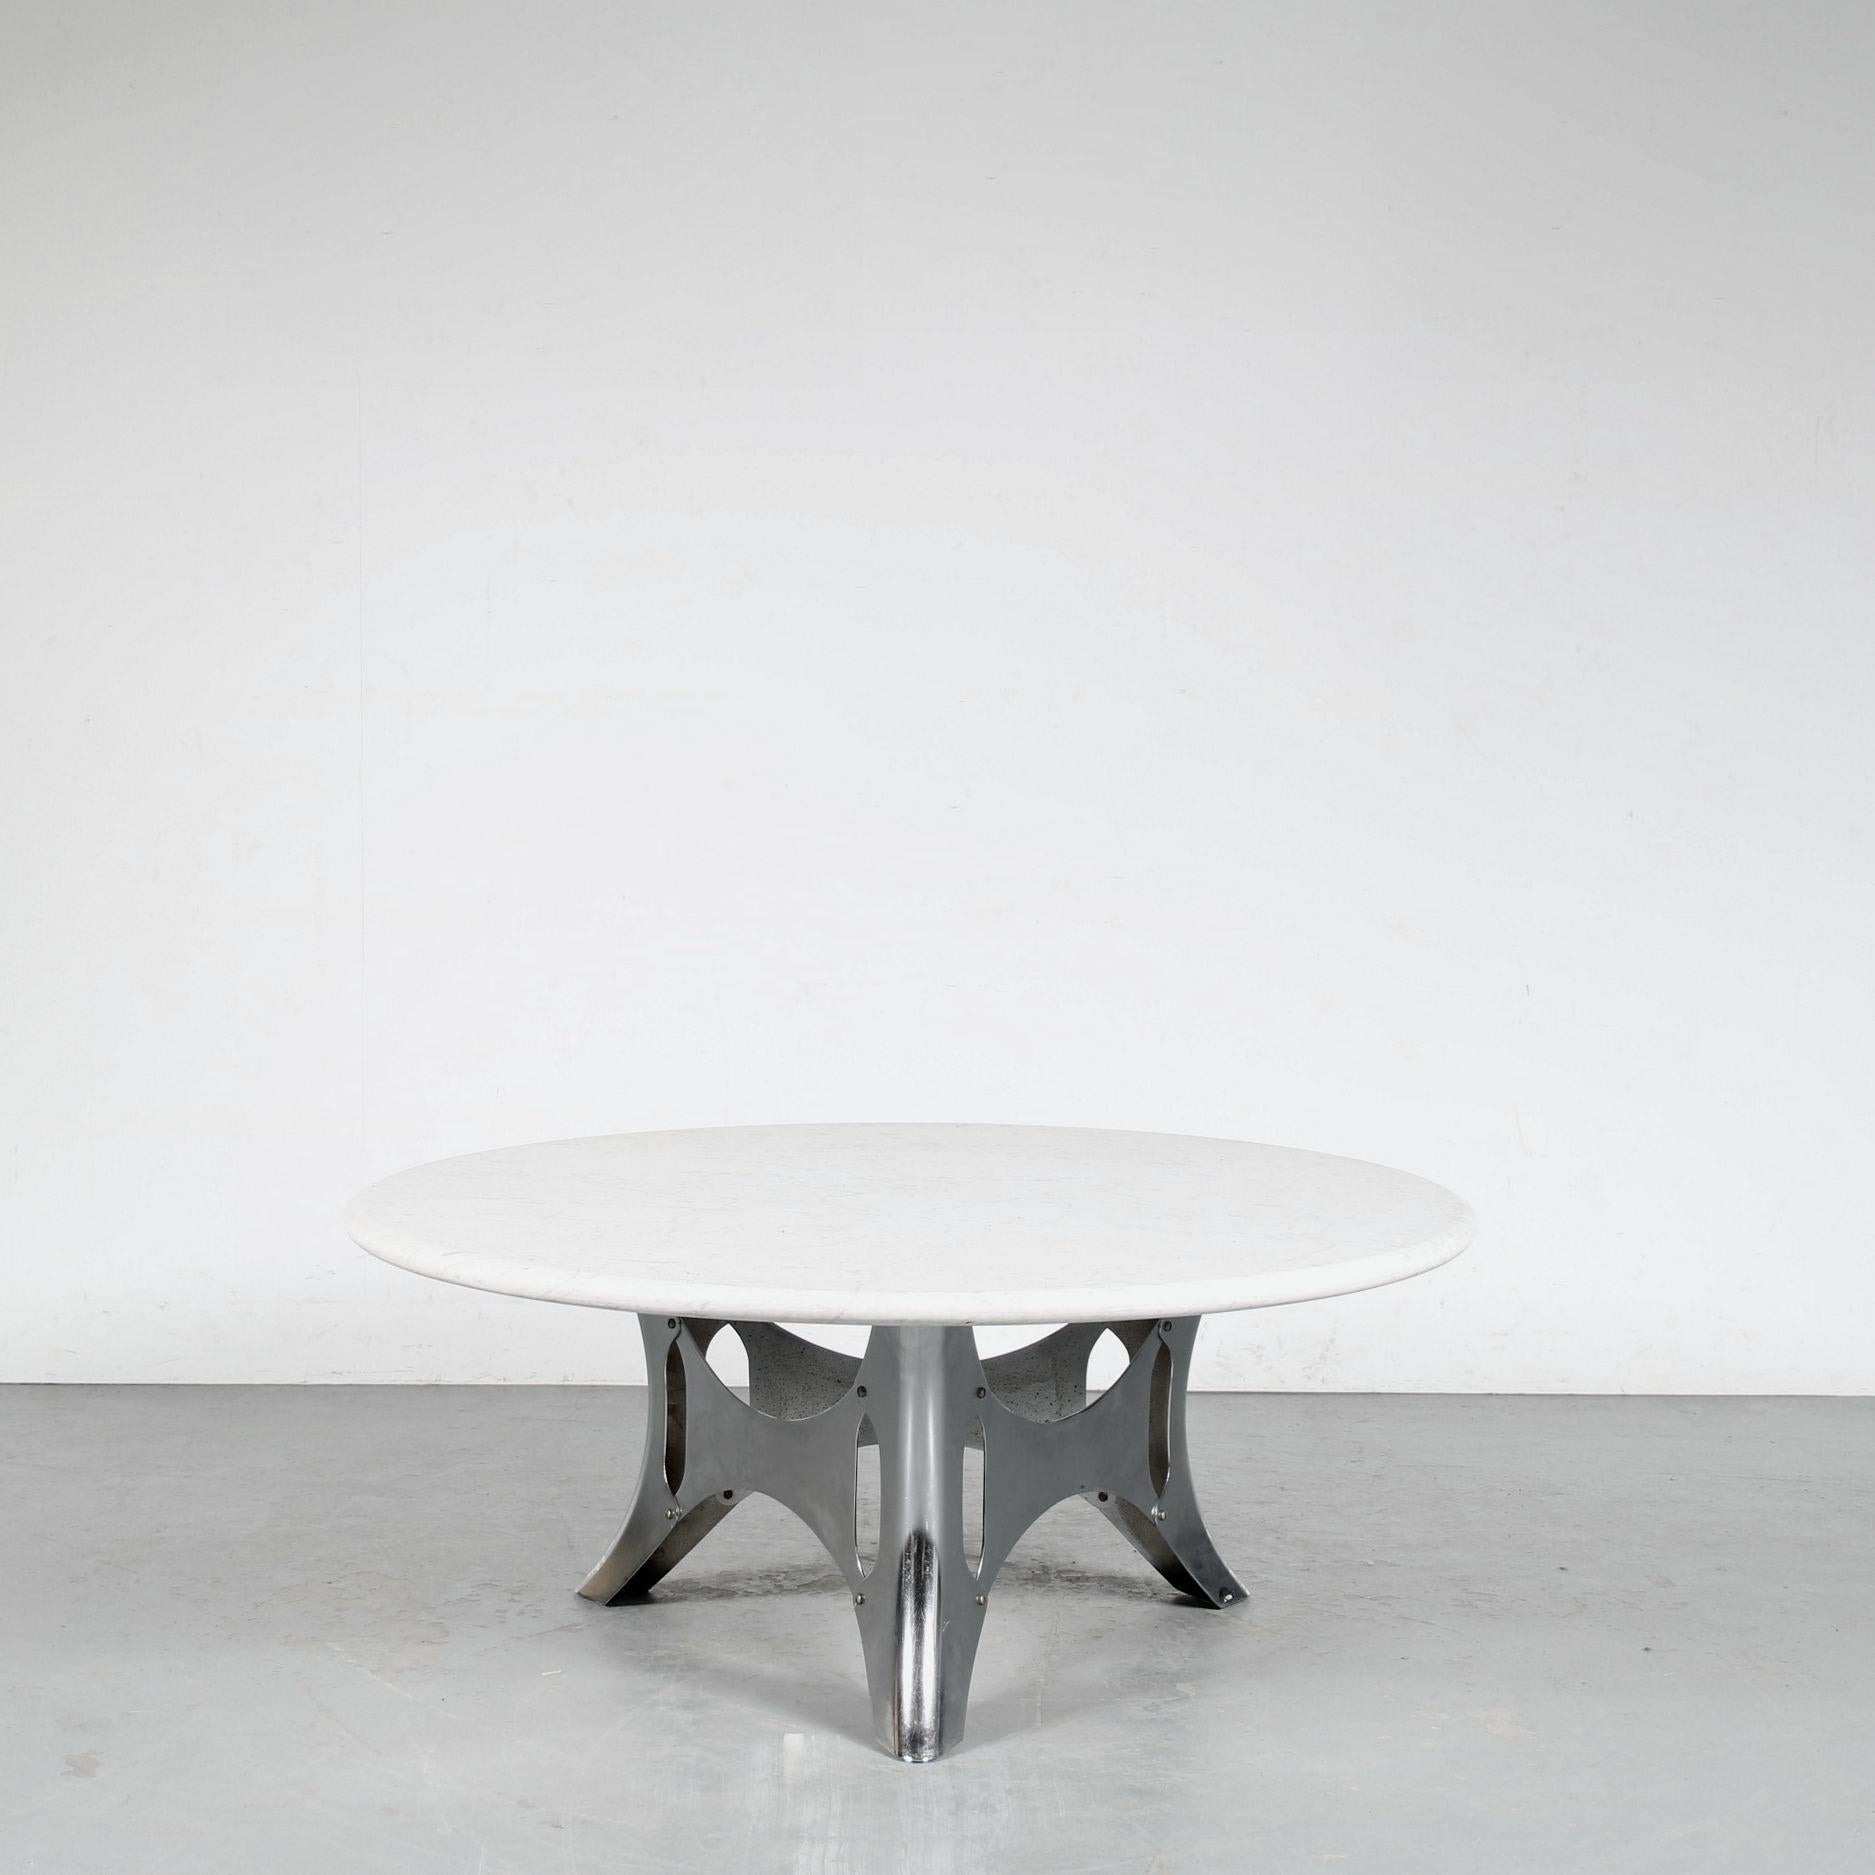 This is a rare “Bumper” Table by Dutch designer Martin Visser, manufactured by ‘t Spectrum in the Netherlands around 1960.

This is one of Visser’s most unique pieces, designed as a modern version of a baroque table design. The chrome plated metal